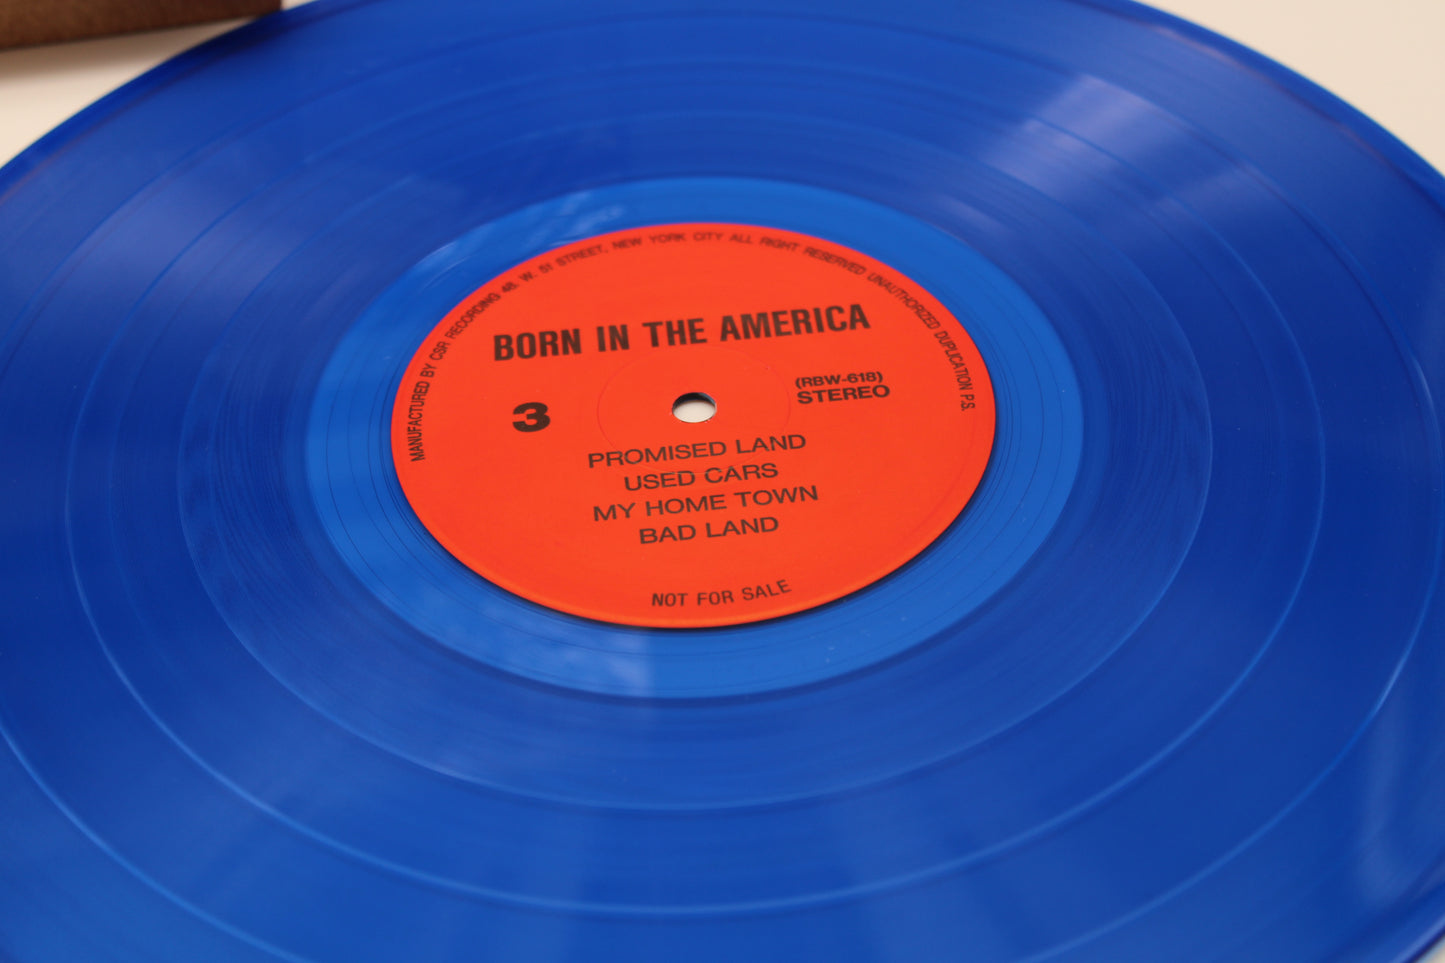 Bruce Springsteen "Born In The America" 3LPs Japan Press Unofficial Vinyl - Color